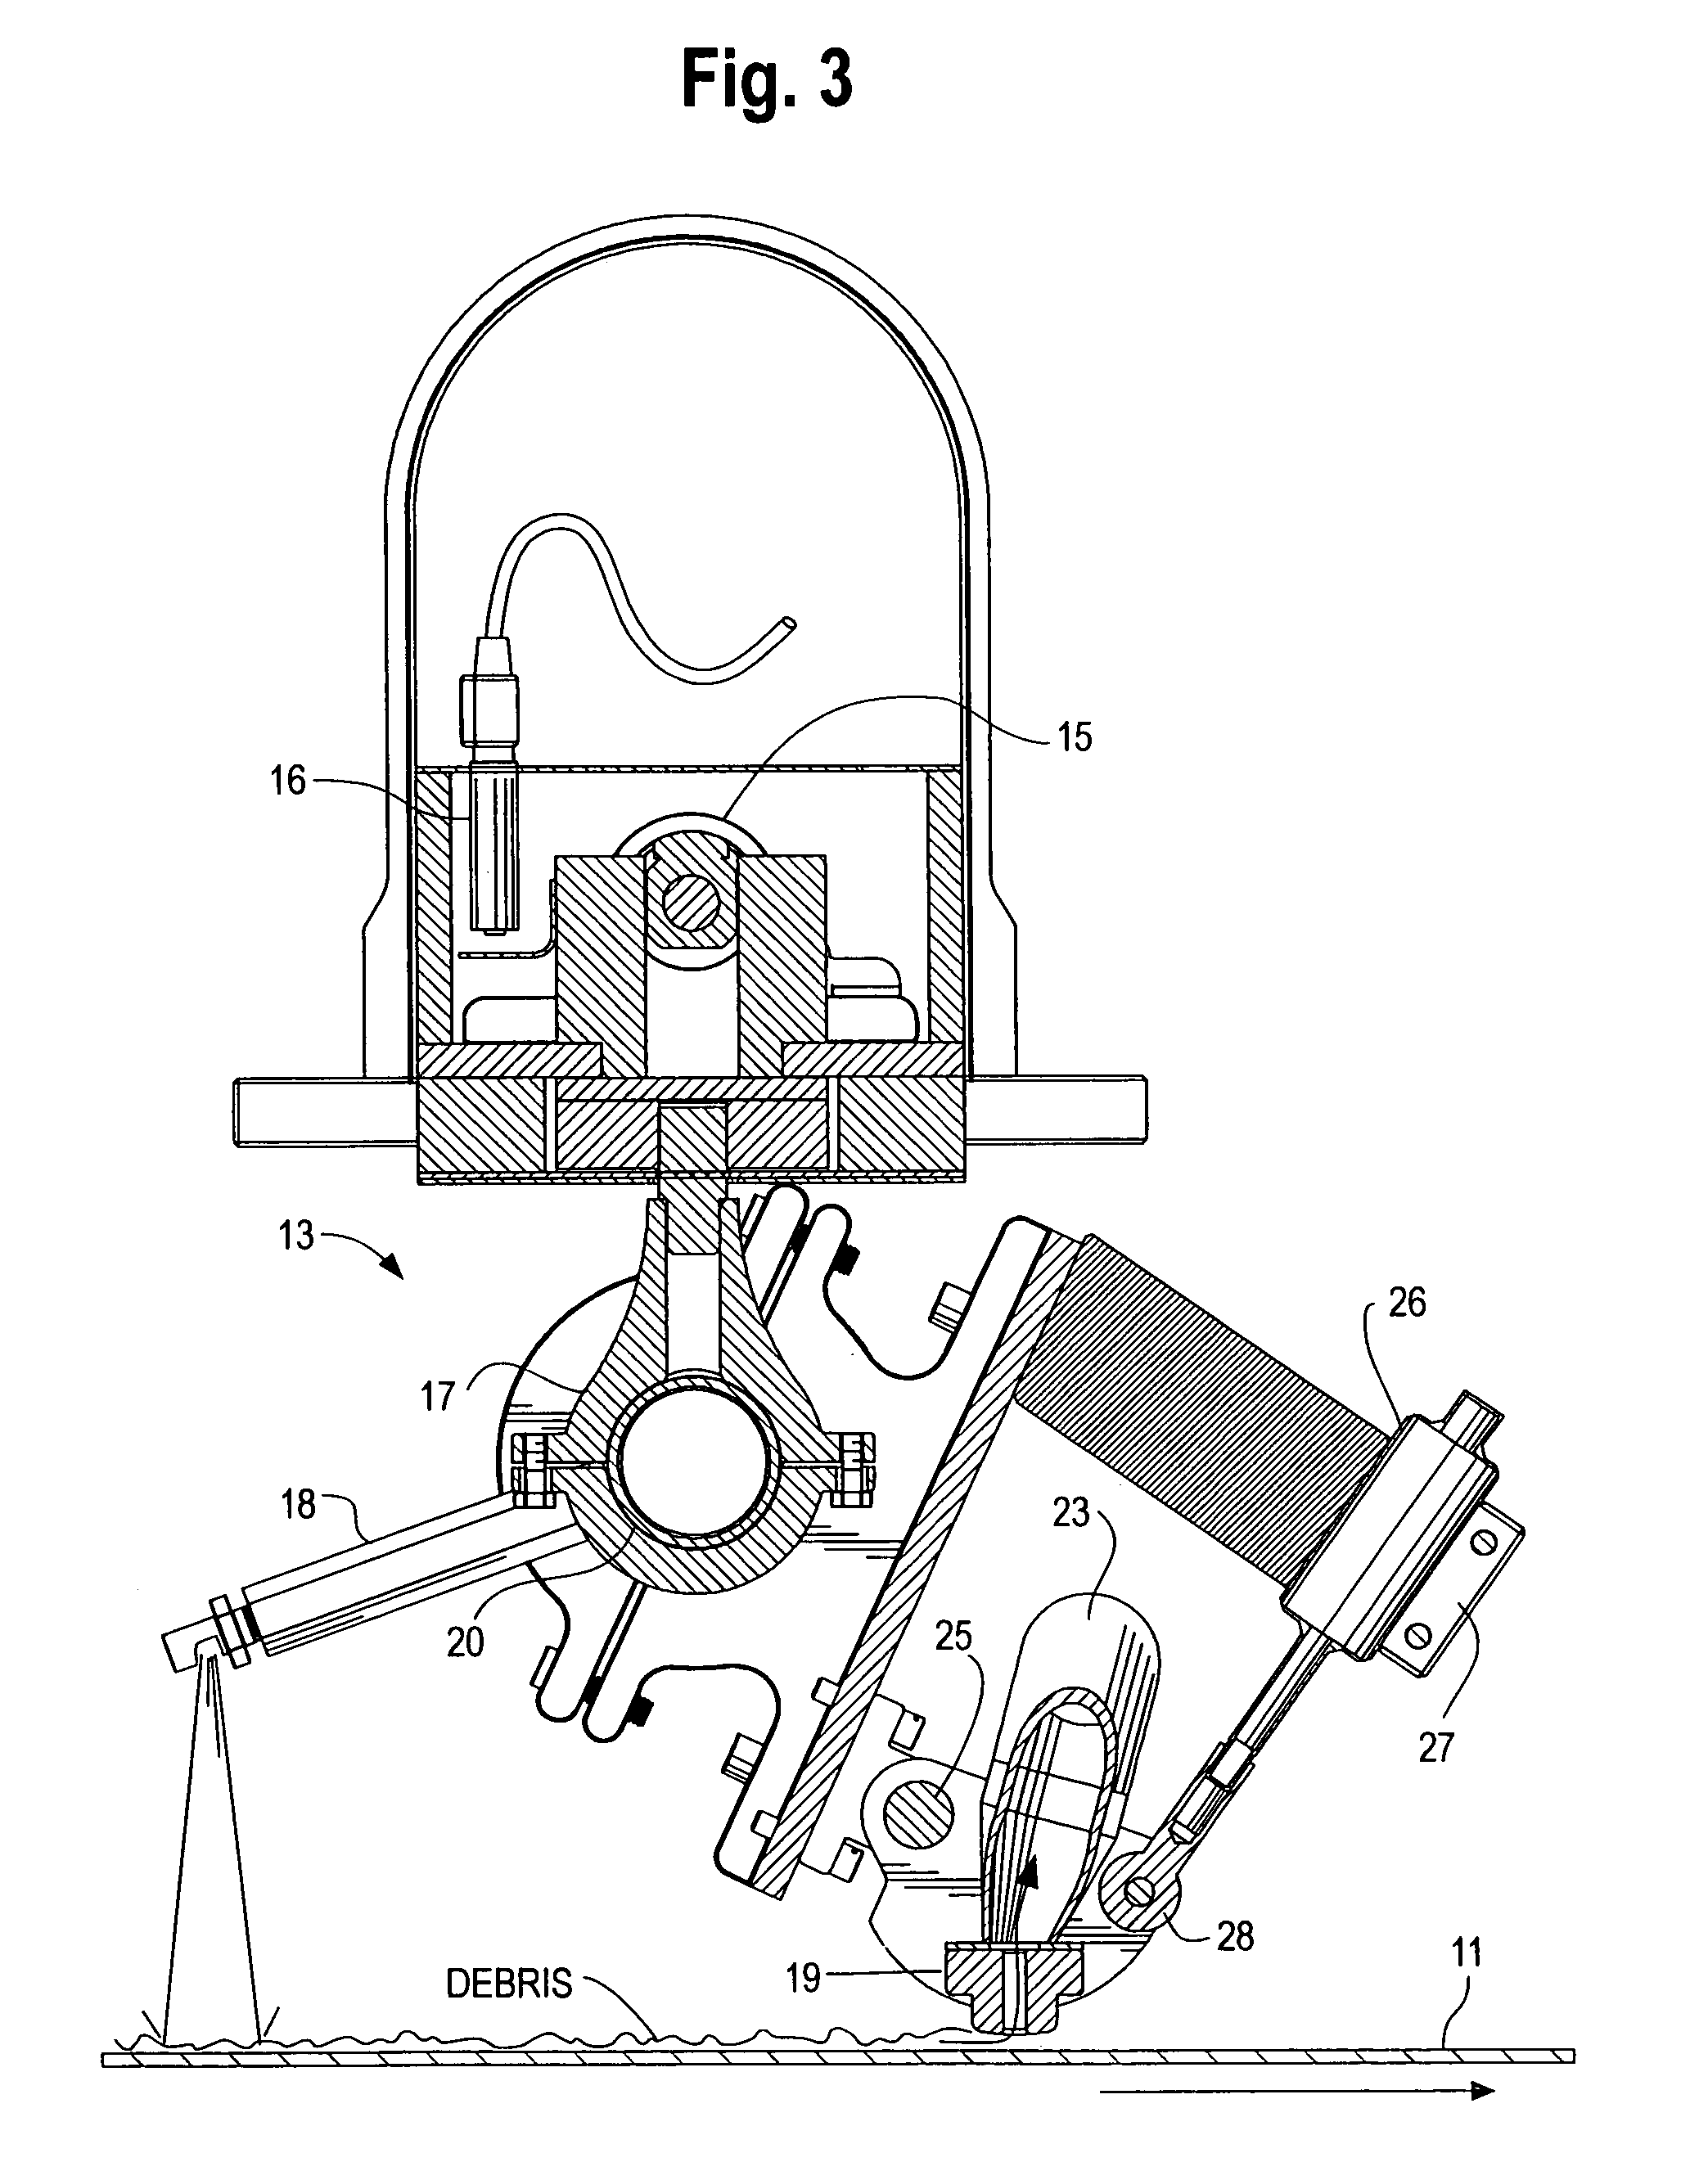 Device for cleaning corrugator belts